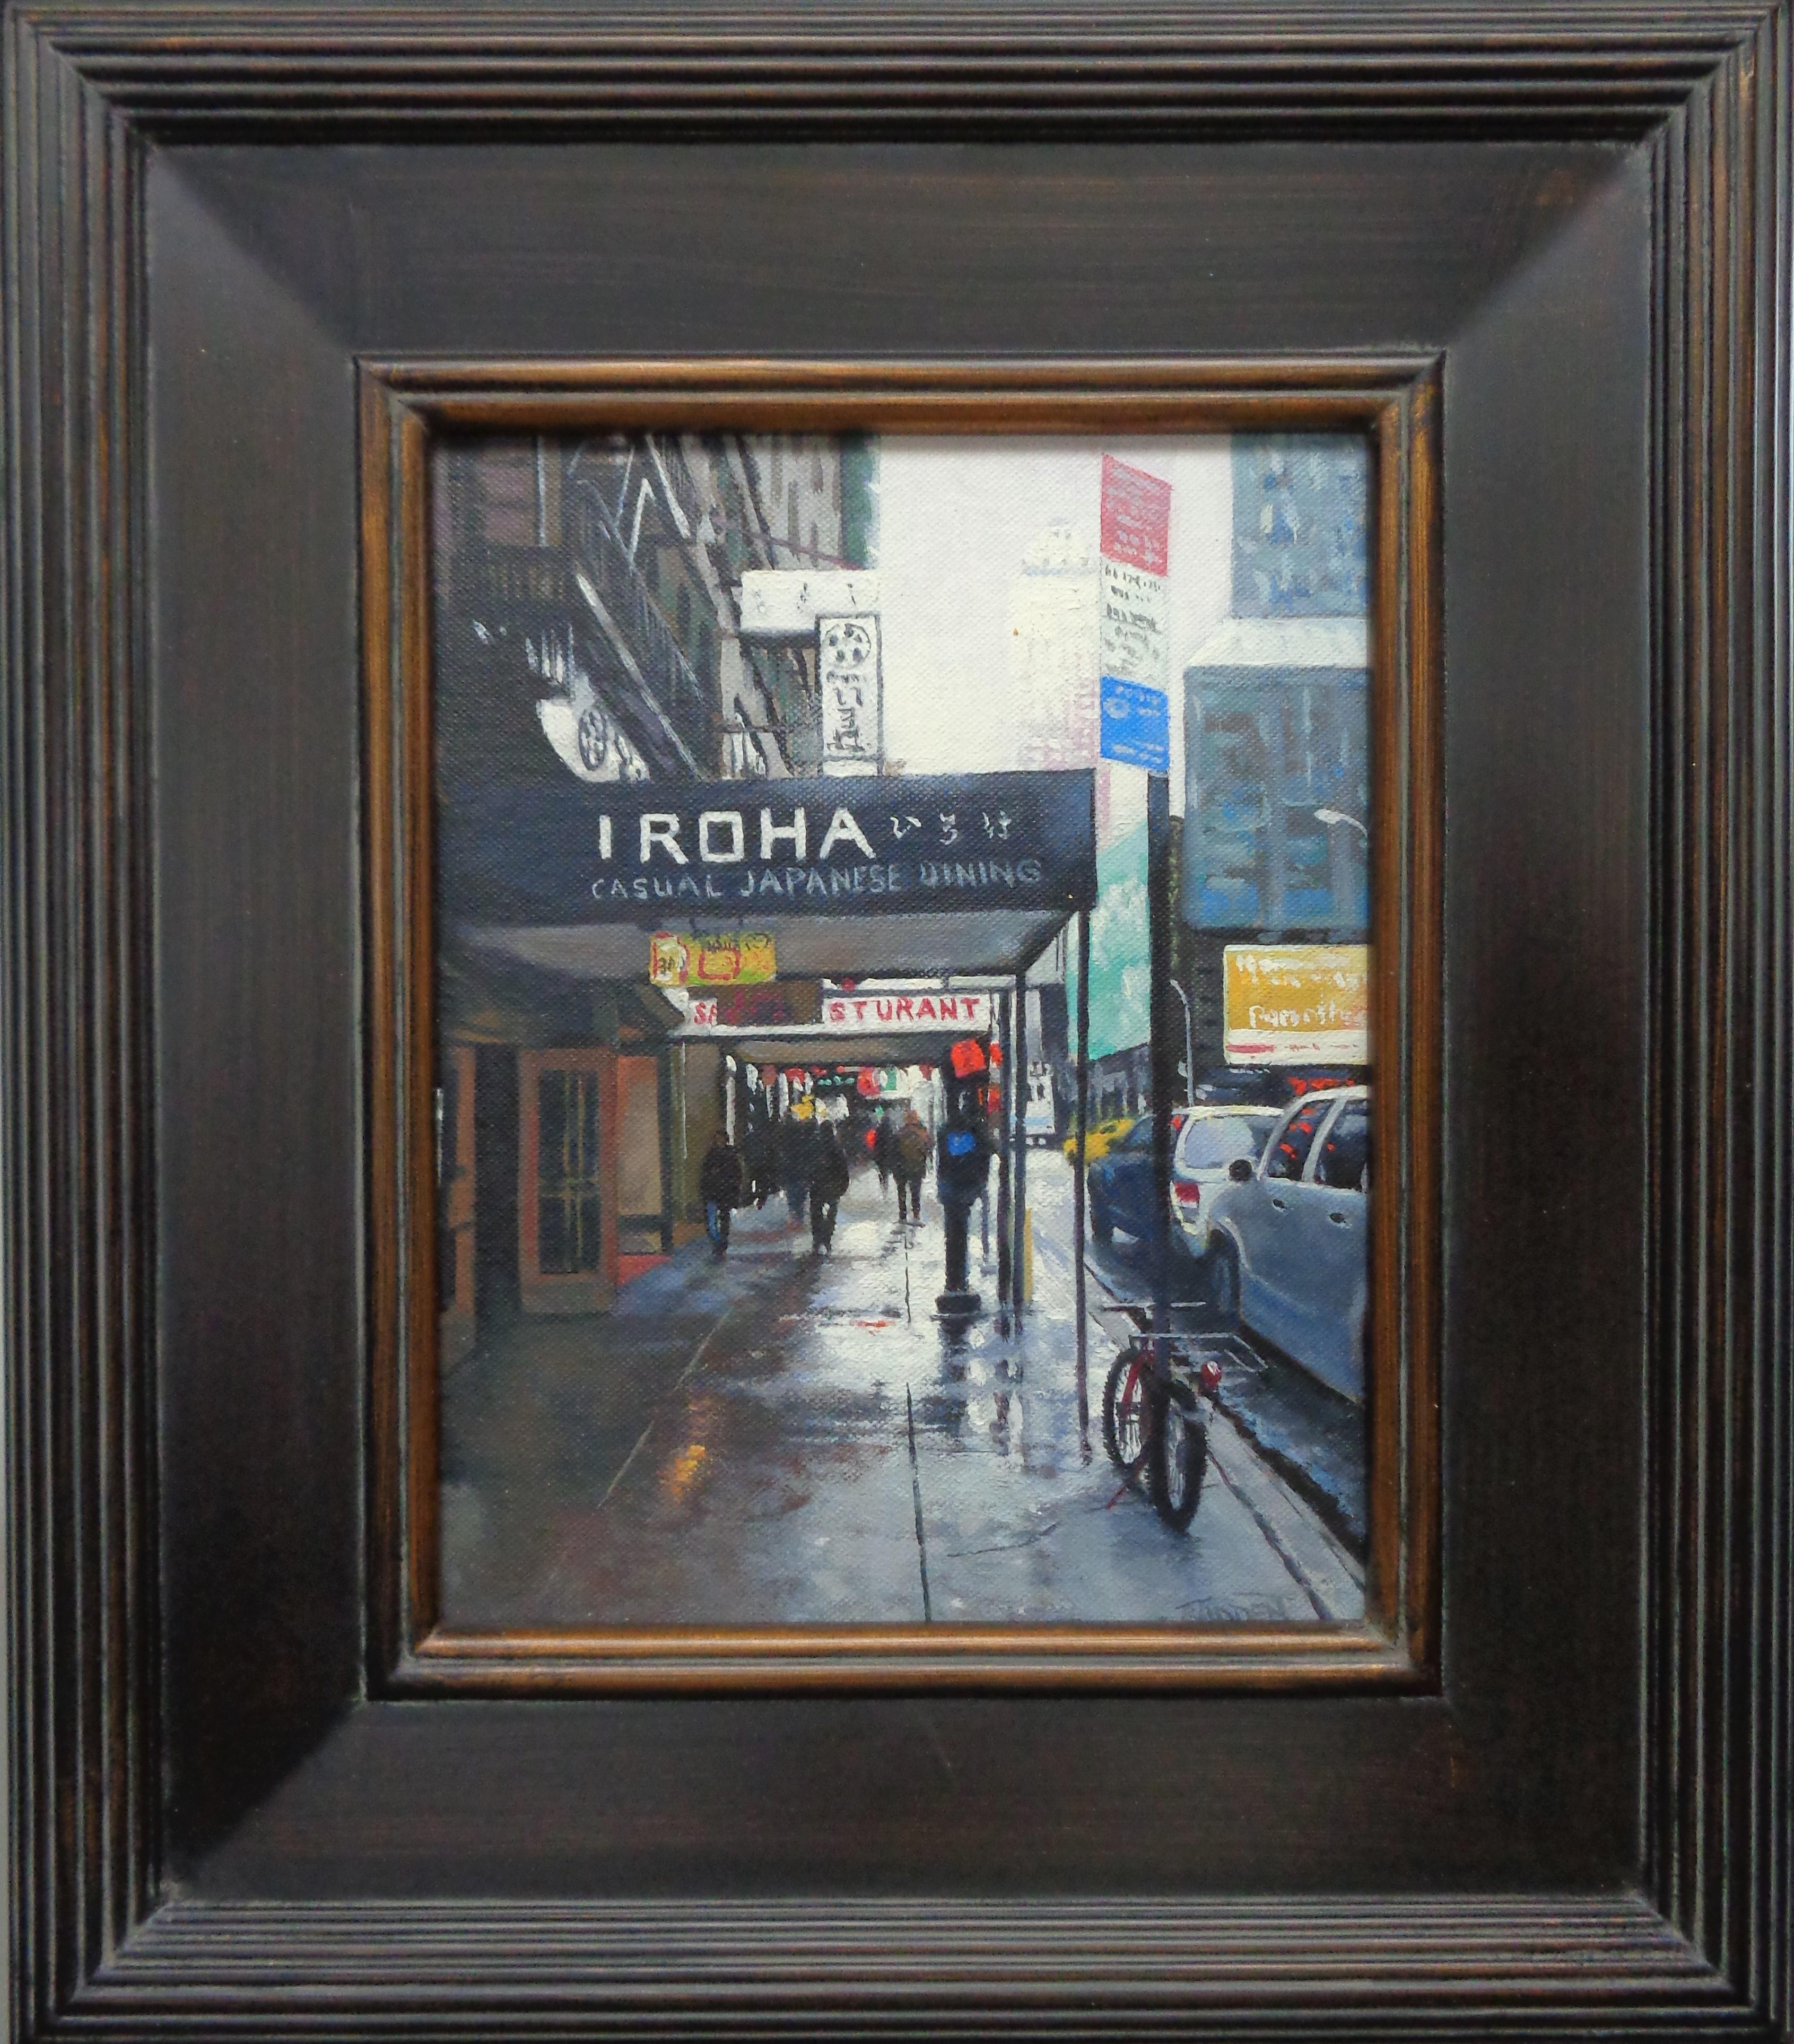 Visual Variations A NYC Collage
oil/panel
Image is 10 x 8 unframed, 16.63 x 13.63 framed
An oil painting on canvas panel by award winning contemporary artist Michael Budden that showcases a rainy day street scene on 49th Street. After attending a